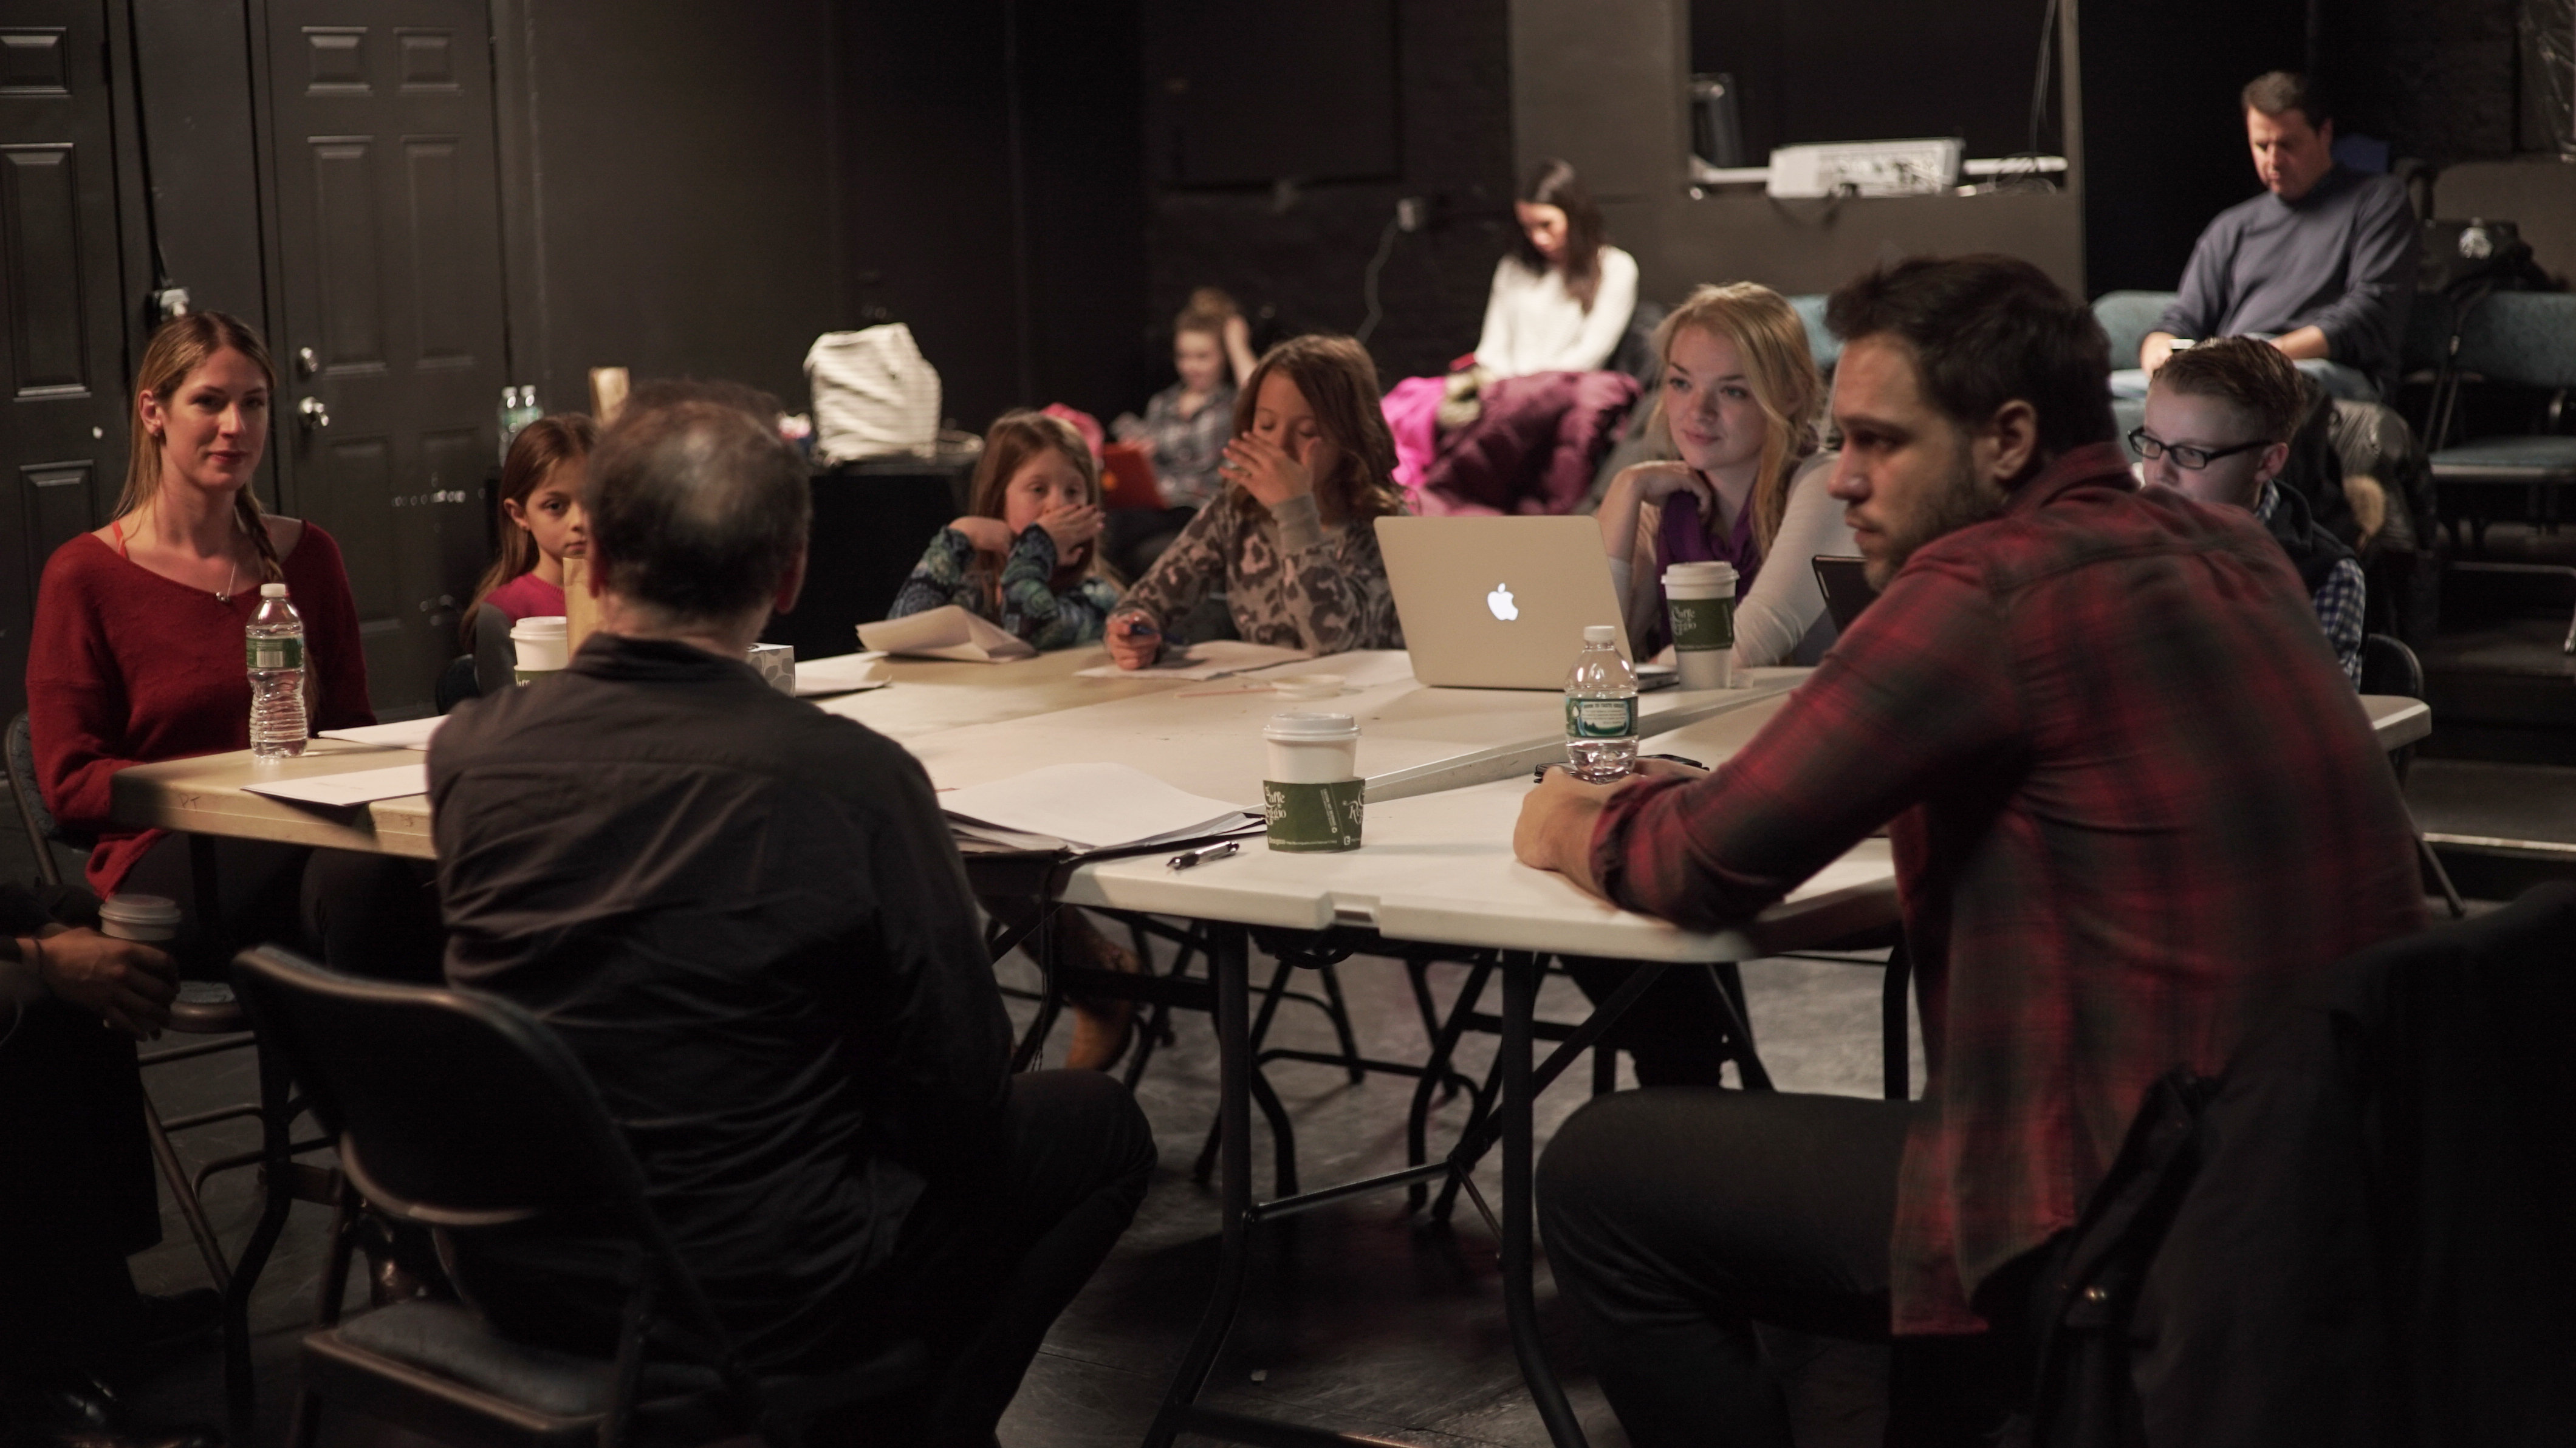 Table Reading and dialect training session with the cast of Pickings. Taso Mikroulis, Katie Vincent, Eila Francis, Chris Liam, Reese Grande, Samantha Zaino, Elyse Price and dialect coach Lester Thomas Shane.